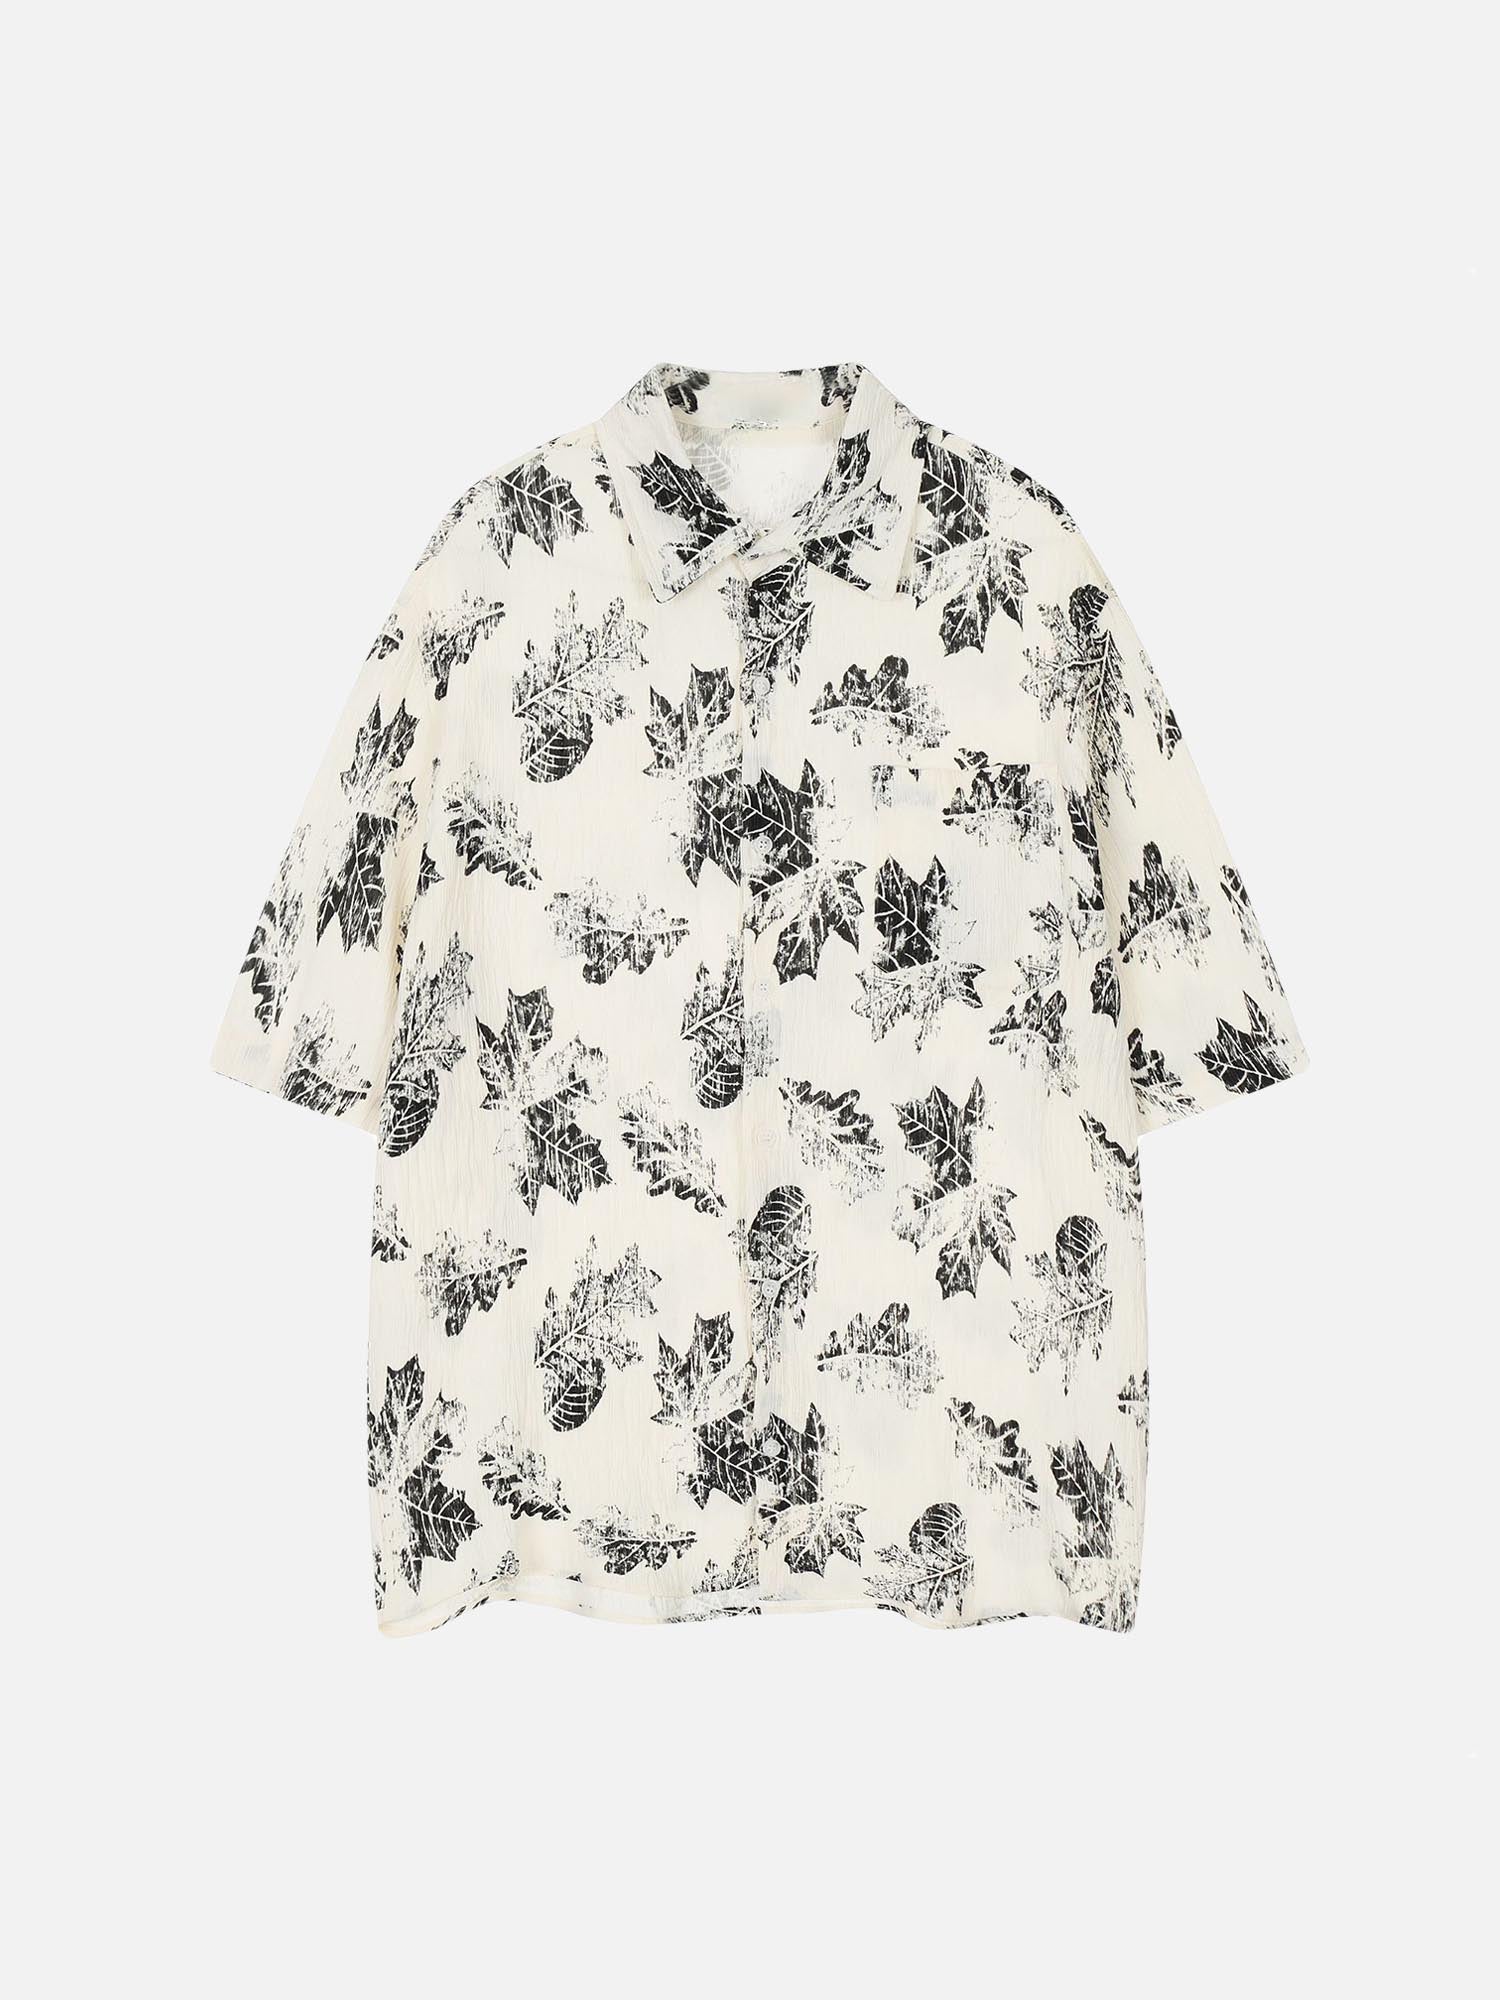 Thesupermade Vintage Floral All Over Print Short Sleeve Shirt